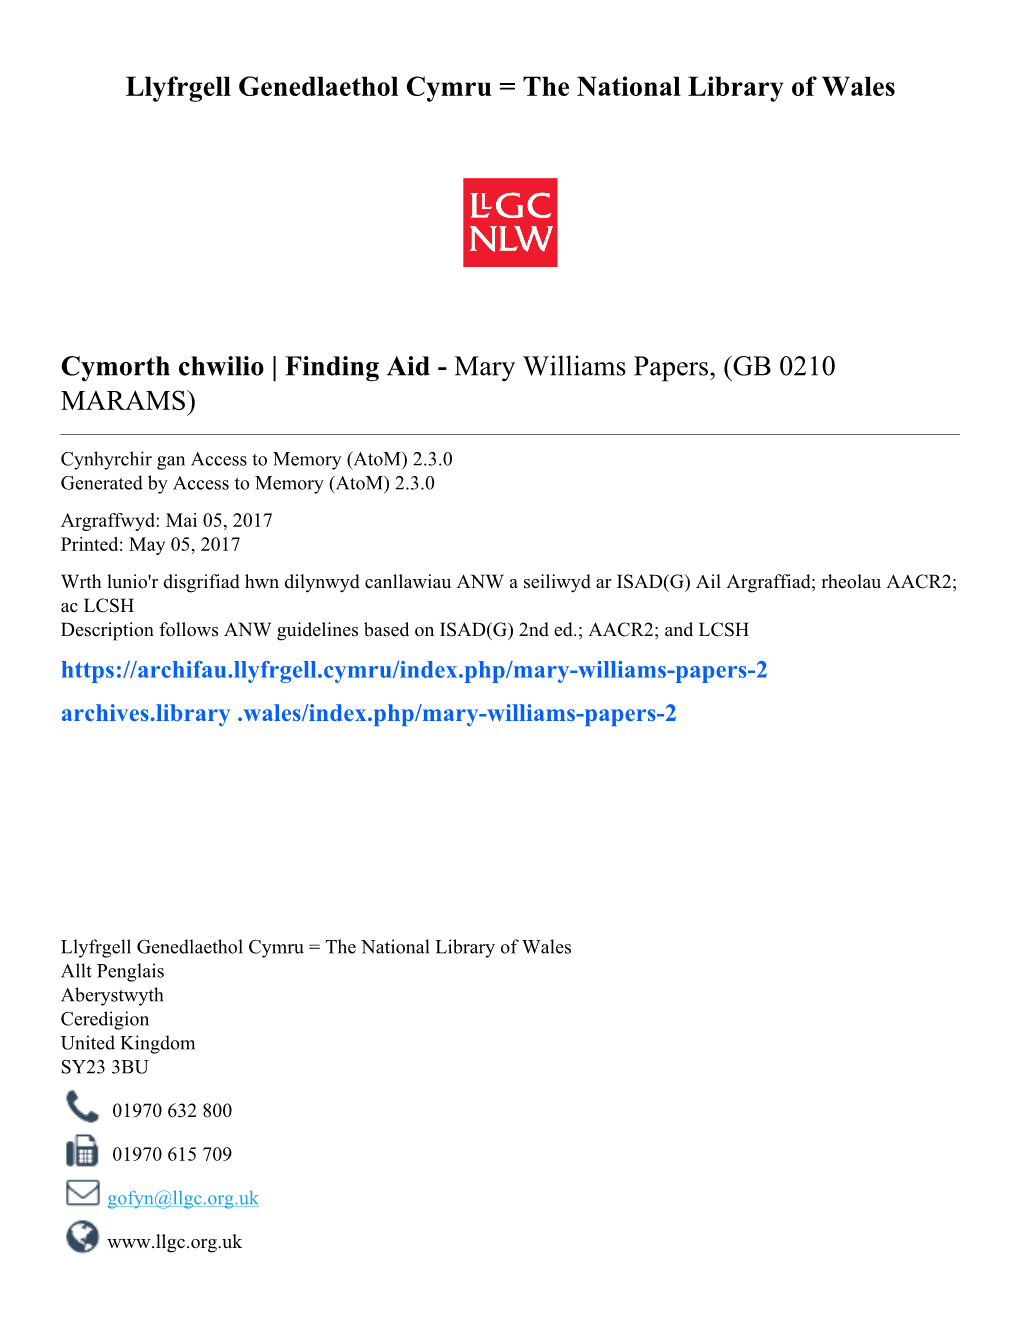 Finding Aid - Mary Williams Papers, (GB 0210 MARAMS)